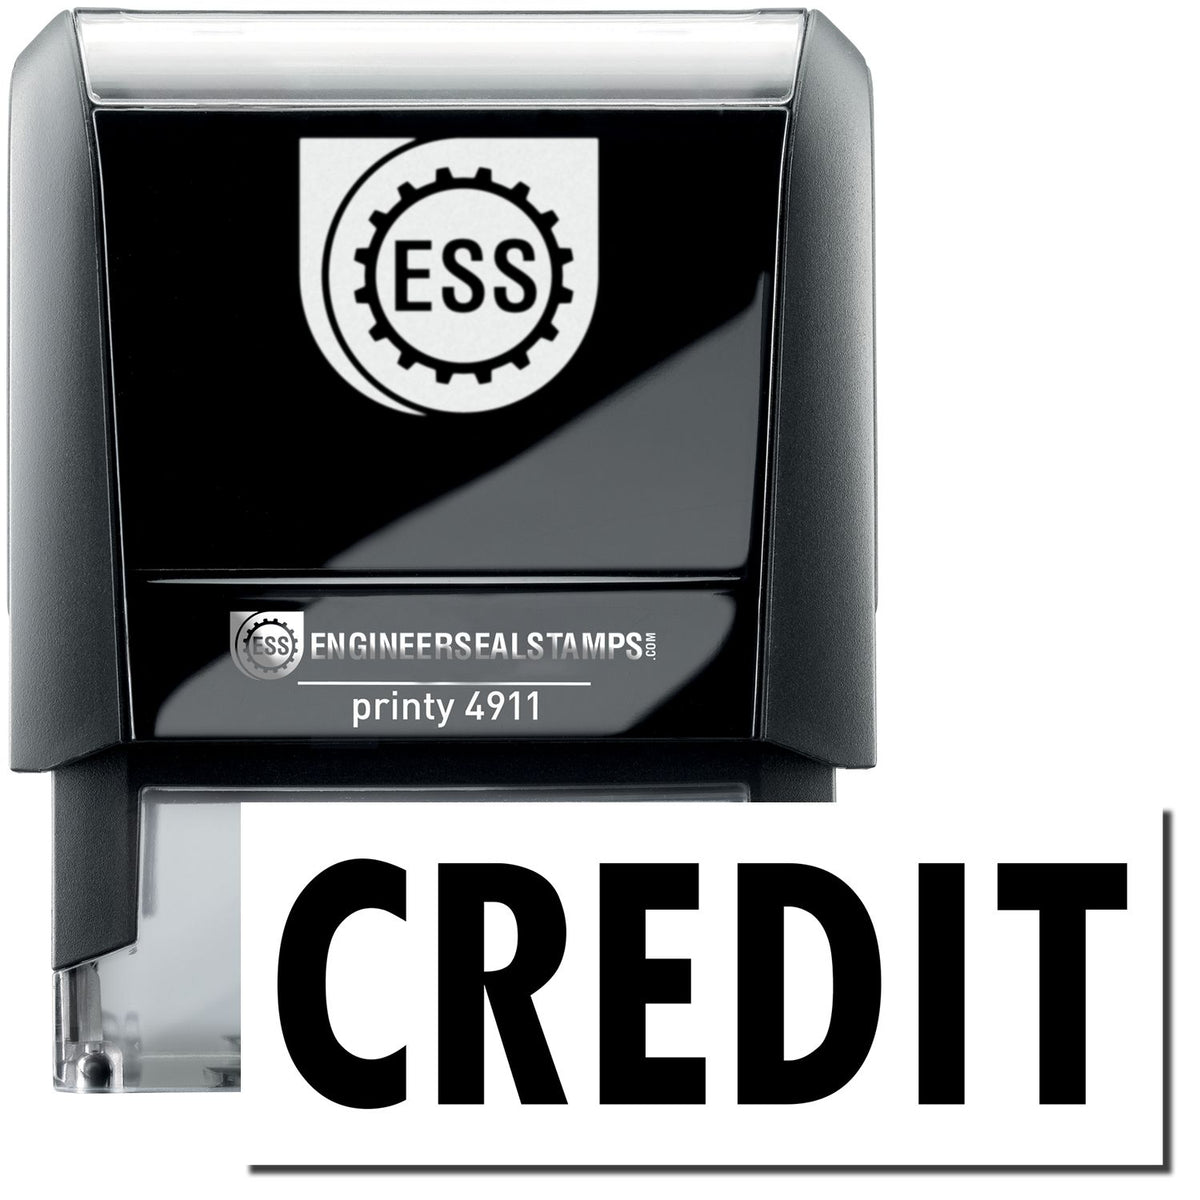 A self-inking stamp with a stamped image showing how the text &quot;CREDIT&quot; is displayed after stamping.